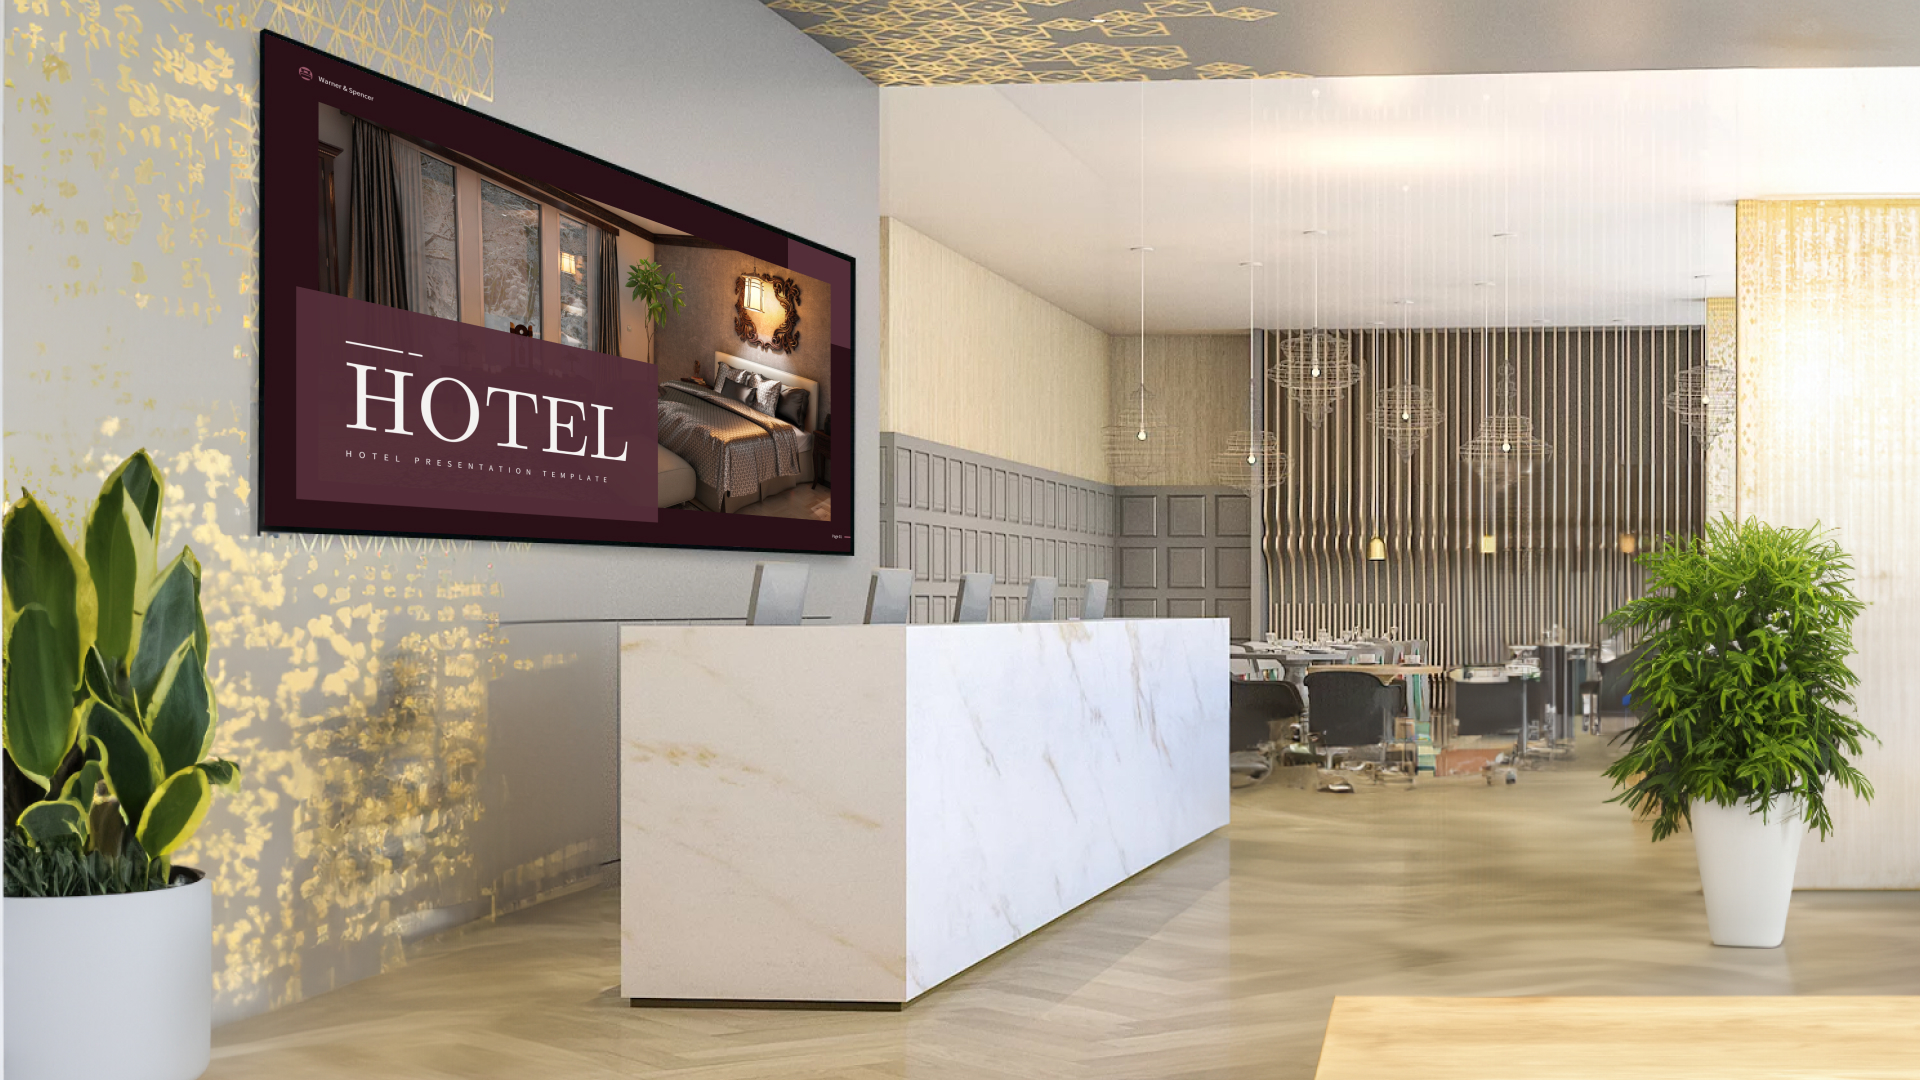 Use of hospitality app and digital signage in hotel reception